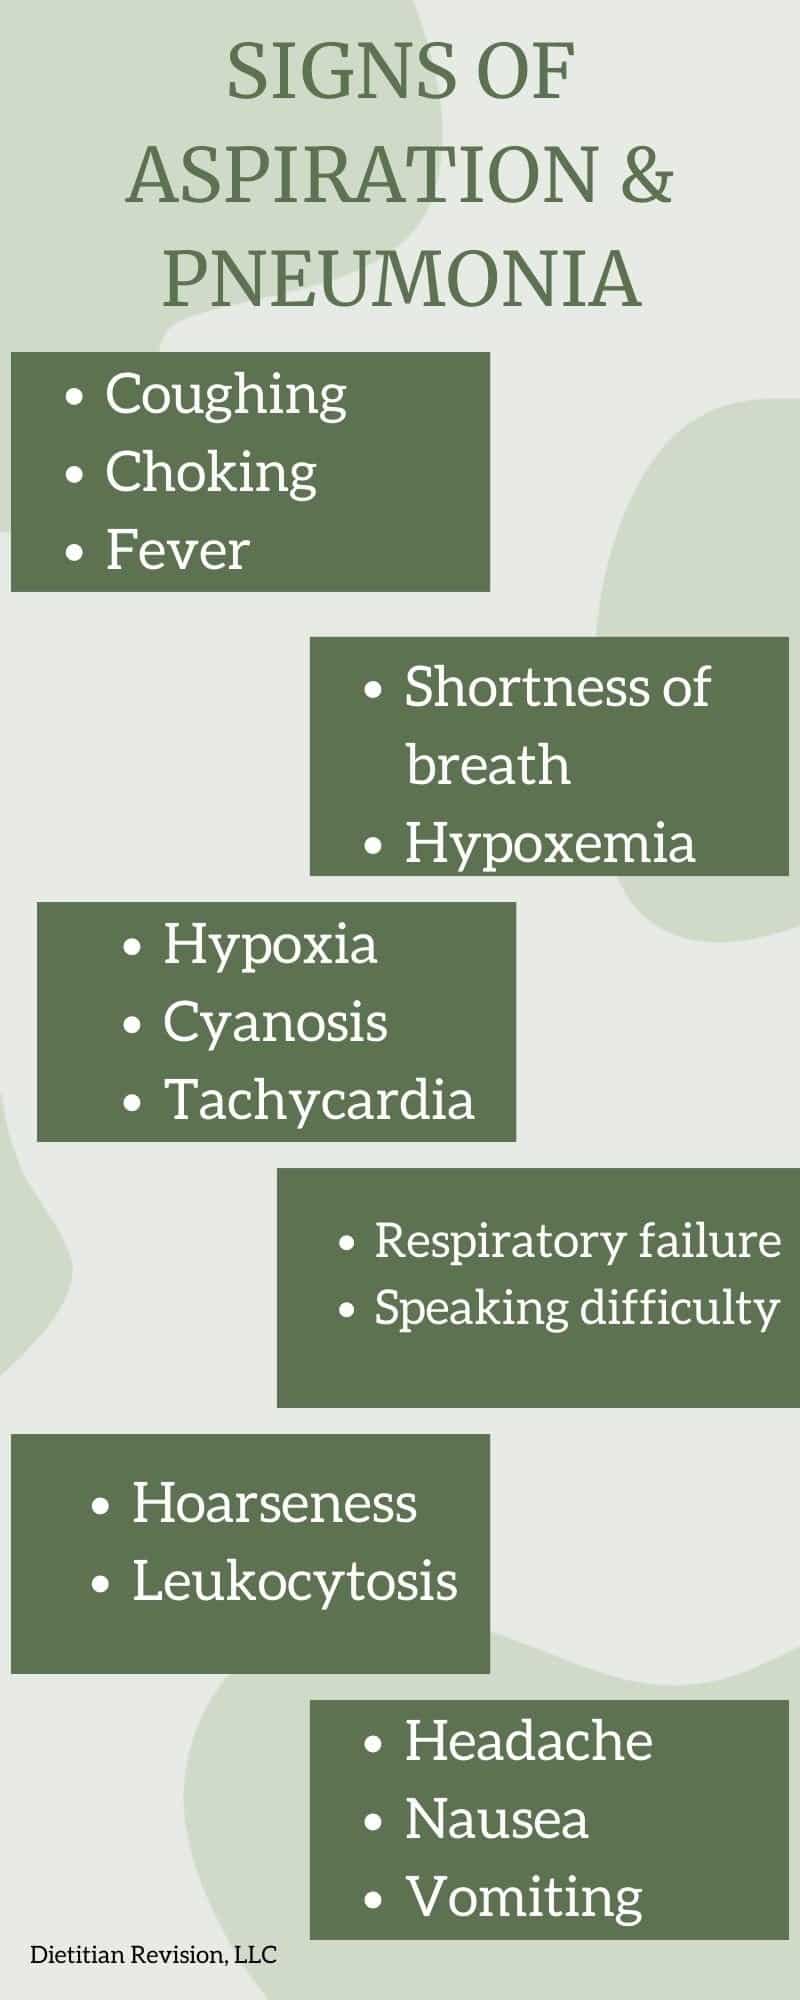 Signs of aspiration & pneumonia: coughing, choking, fever, shortness of breath, hypoxemia, hypoxia, cyanosis, tachycardia, respiratory failure, speaking difficulty, hoarseness, leukocytosis, headache, nausea, vomiting. 